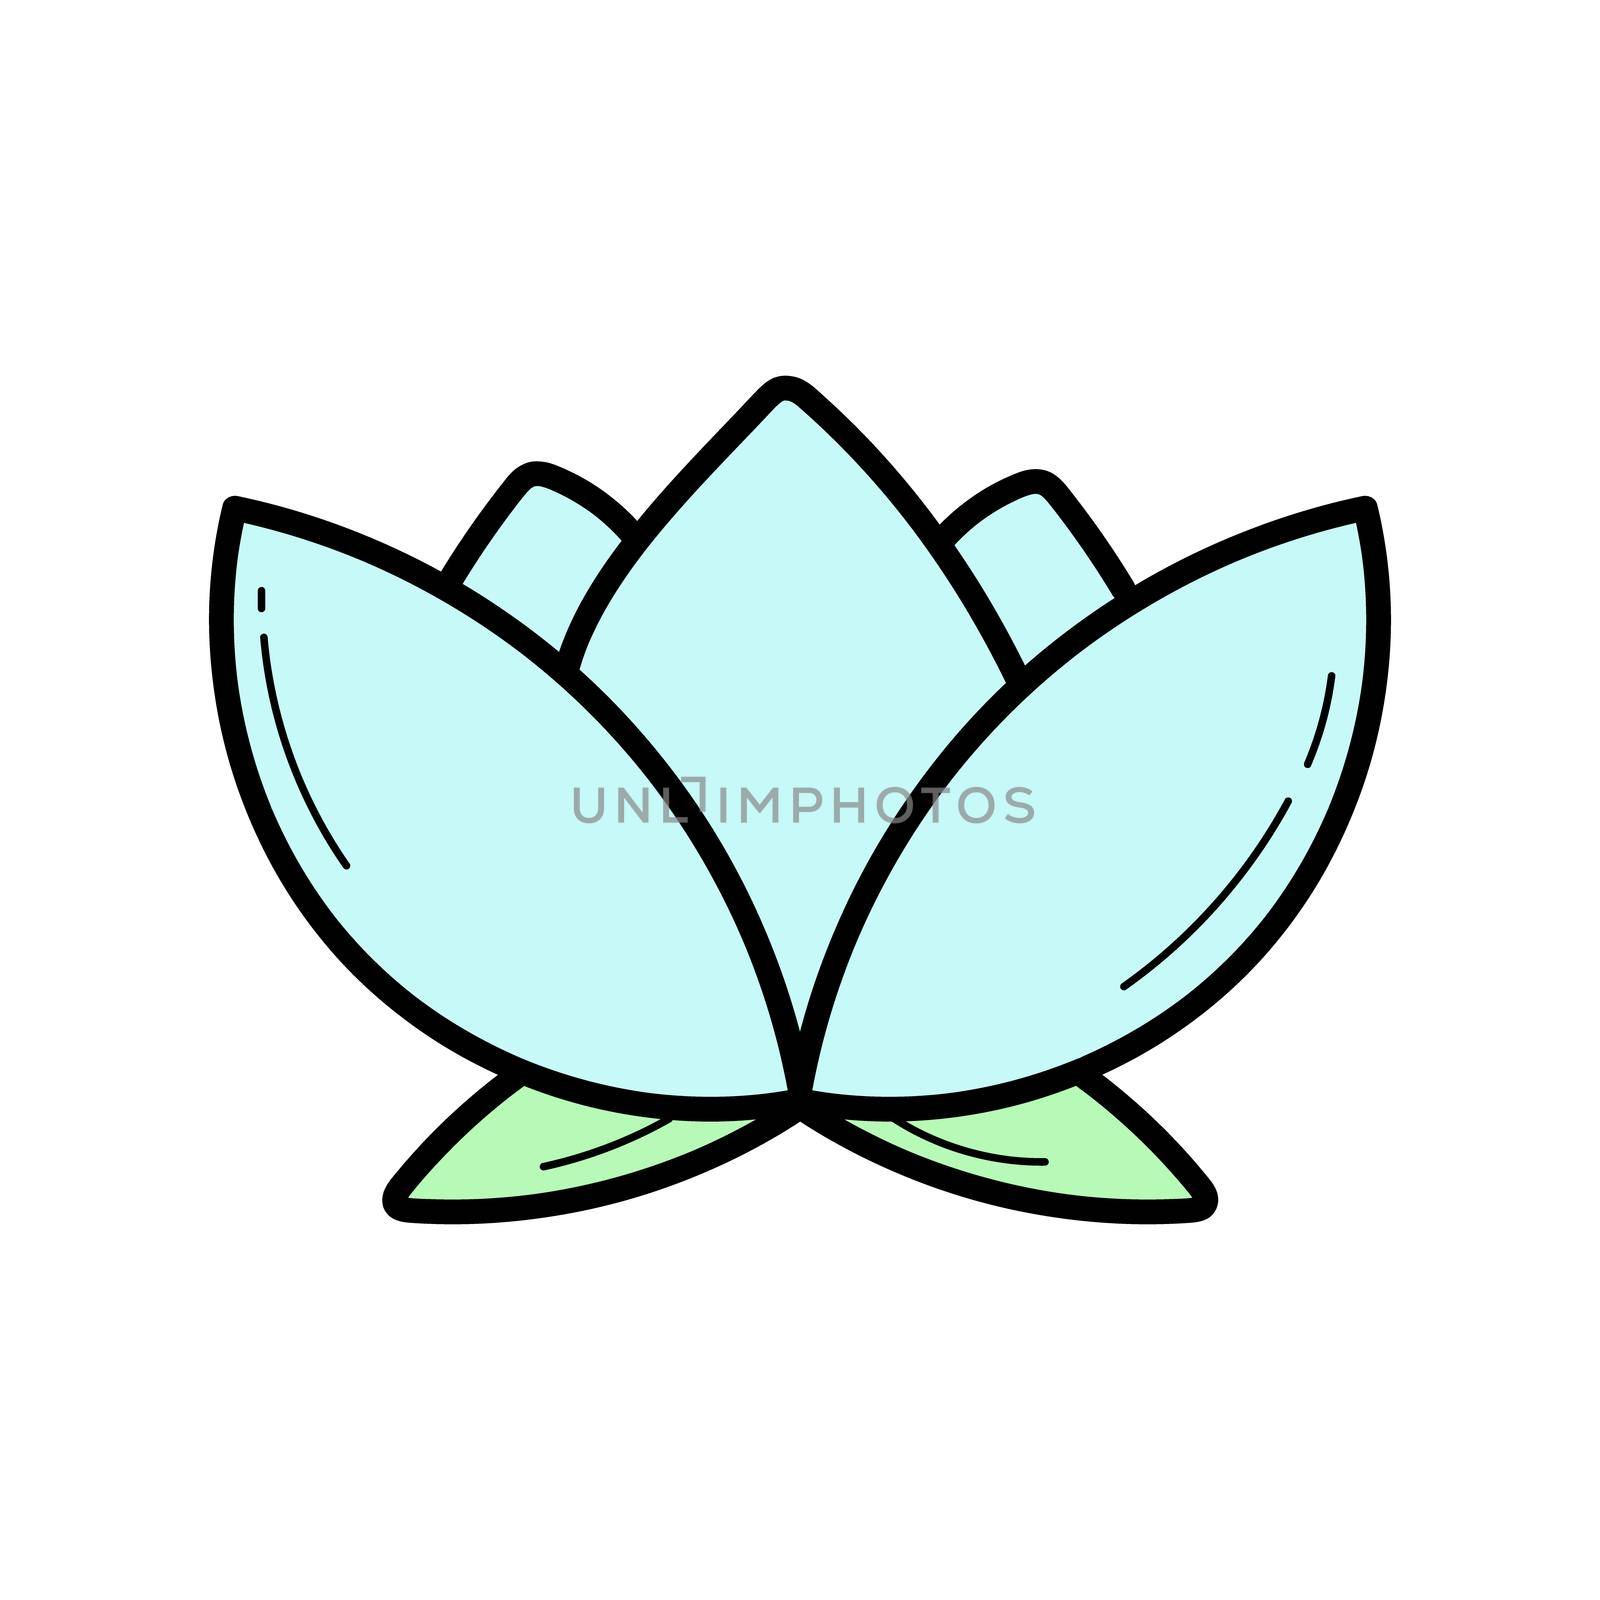 Lotus flower doodle icon, vector illustration on white. Simple drawing in blue color